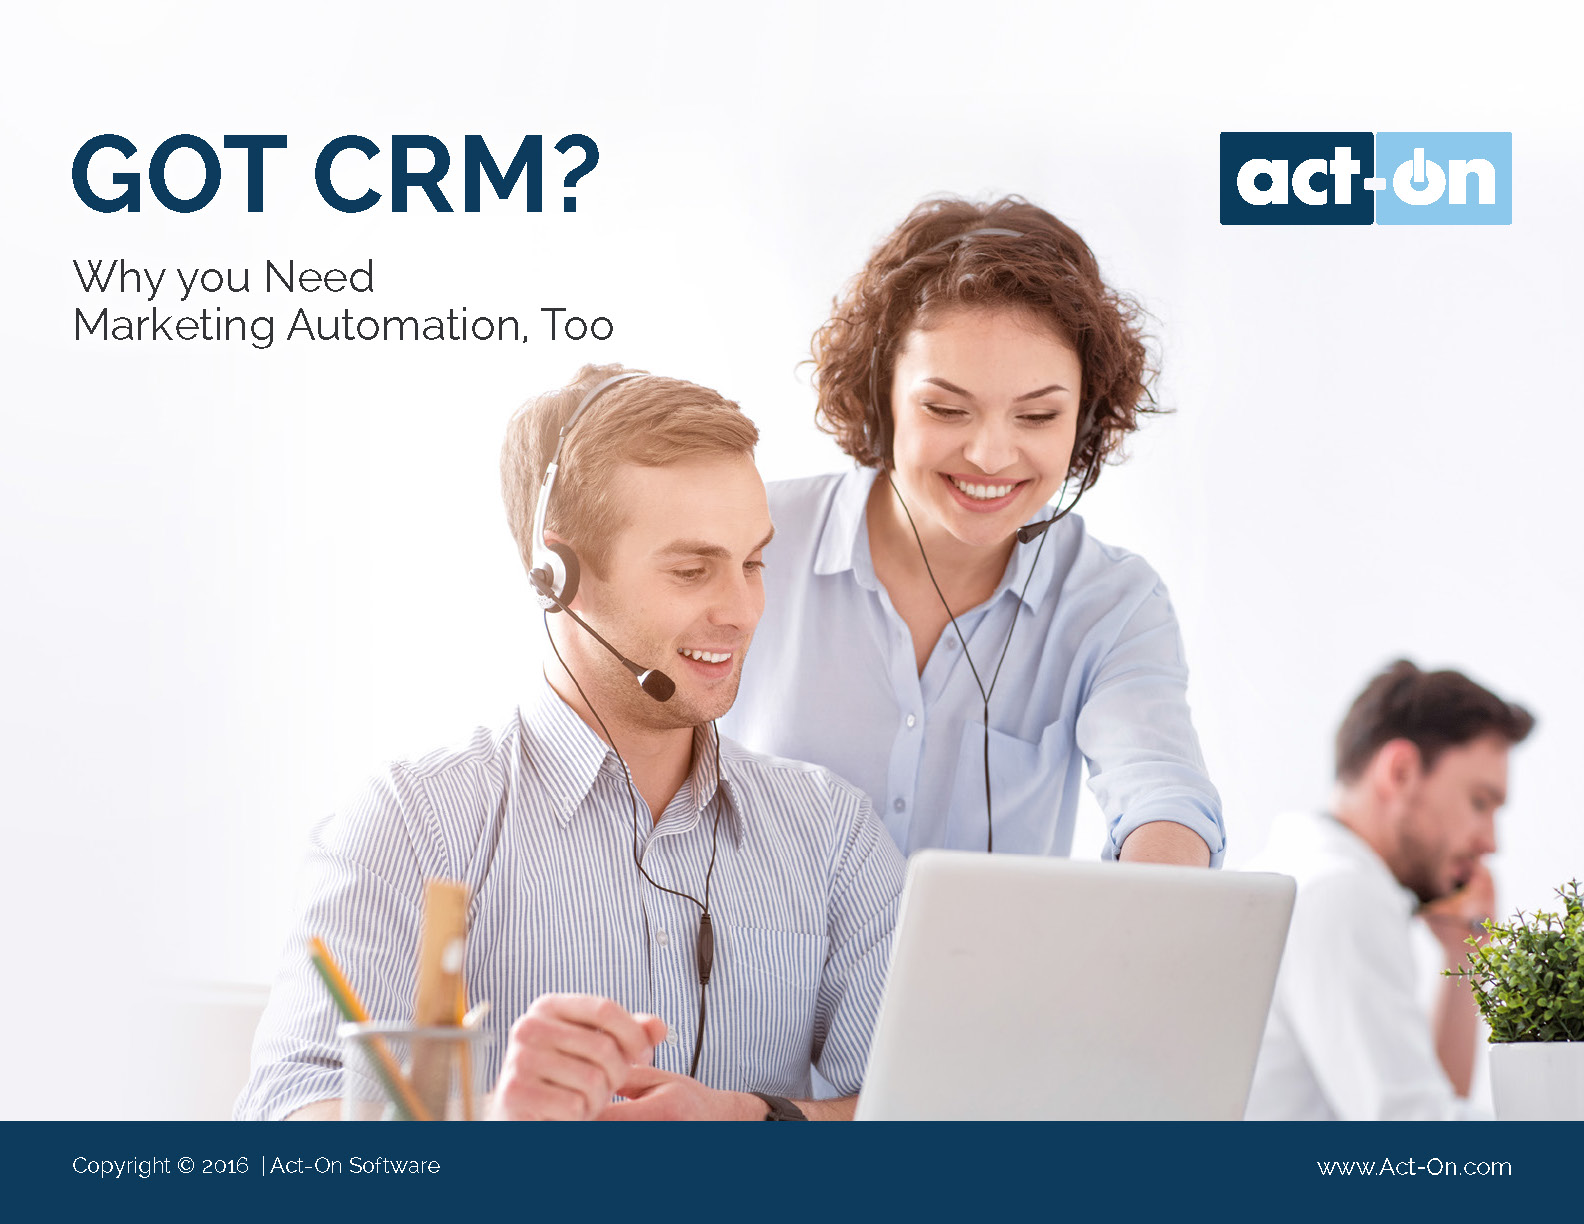 Got CRM - Why You Need Marketing Automation Too